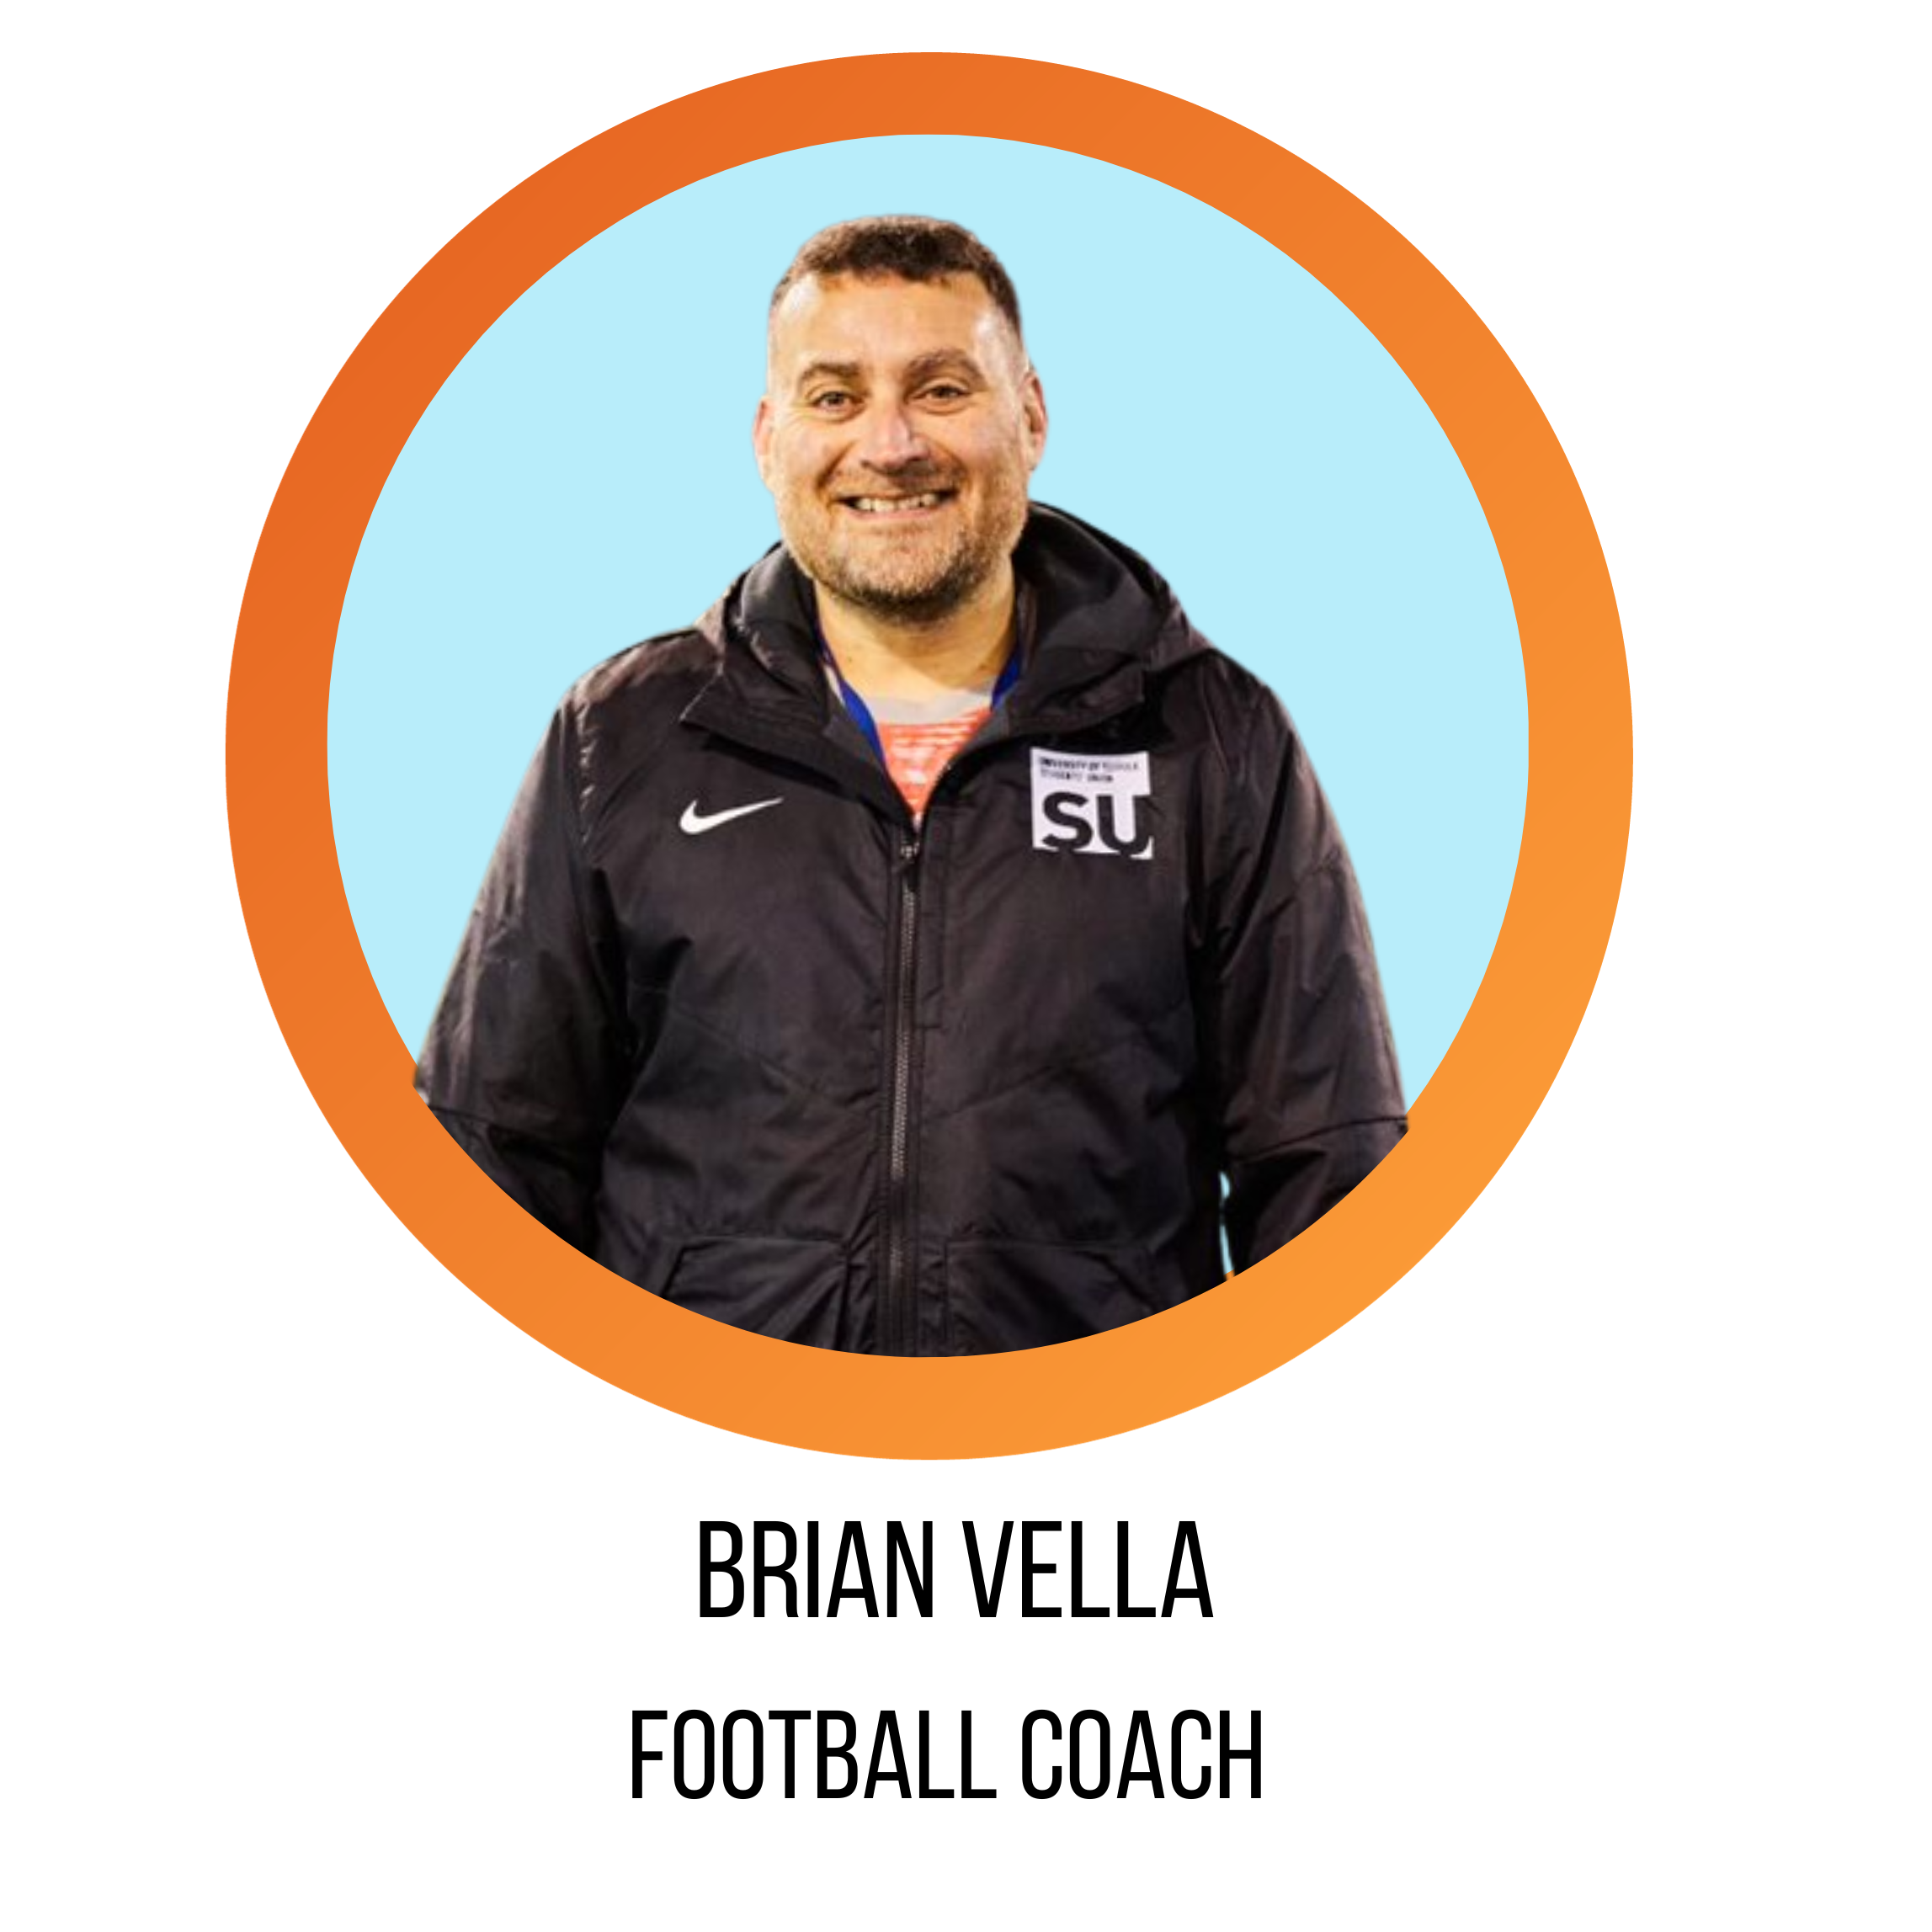 brian vella, football coach, smiling in front of a blue background